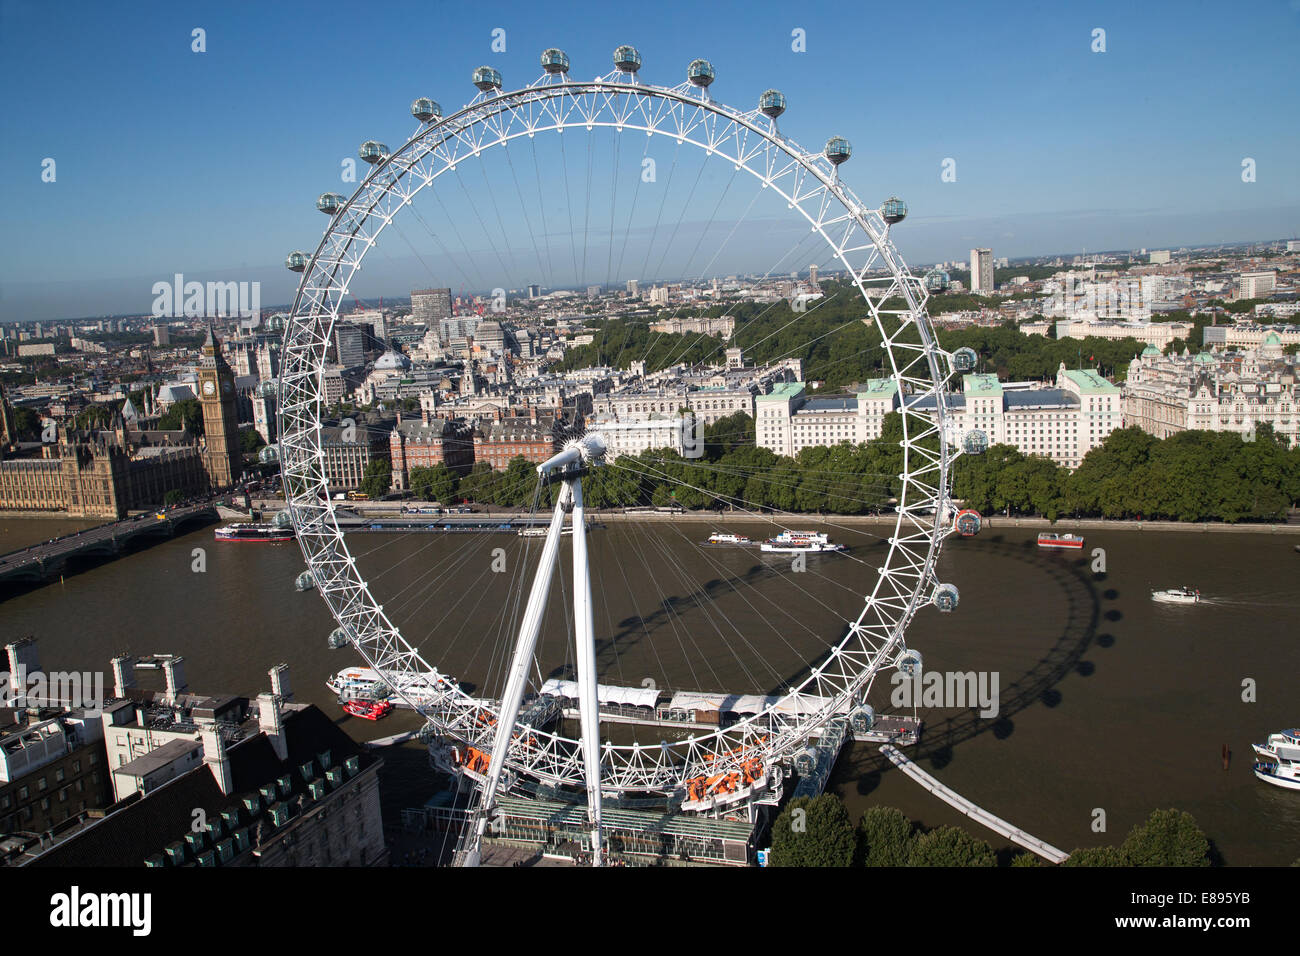 The Millennium Wheel-Ferris wheel completed in February 2000-135 Metres high with 32 pods with the Houses of Parliament Stock Photo